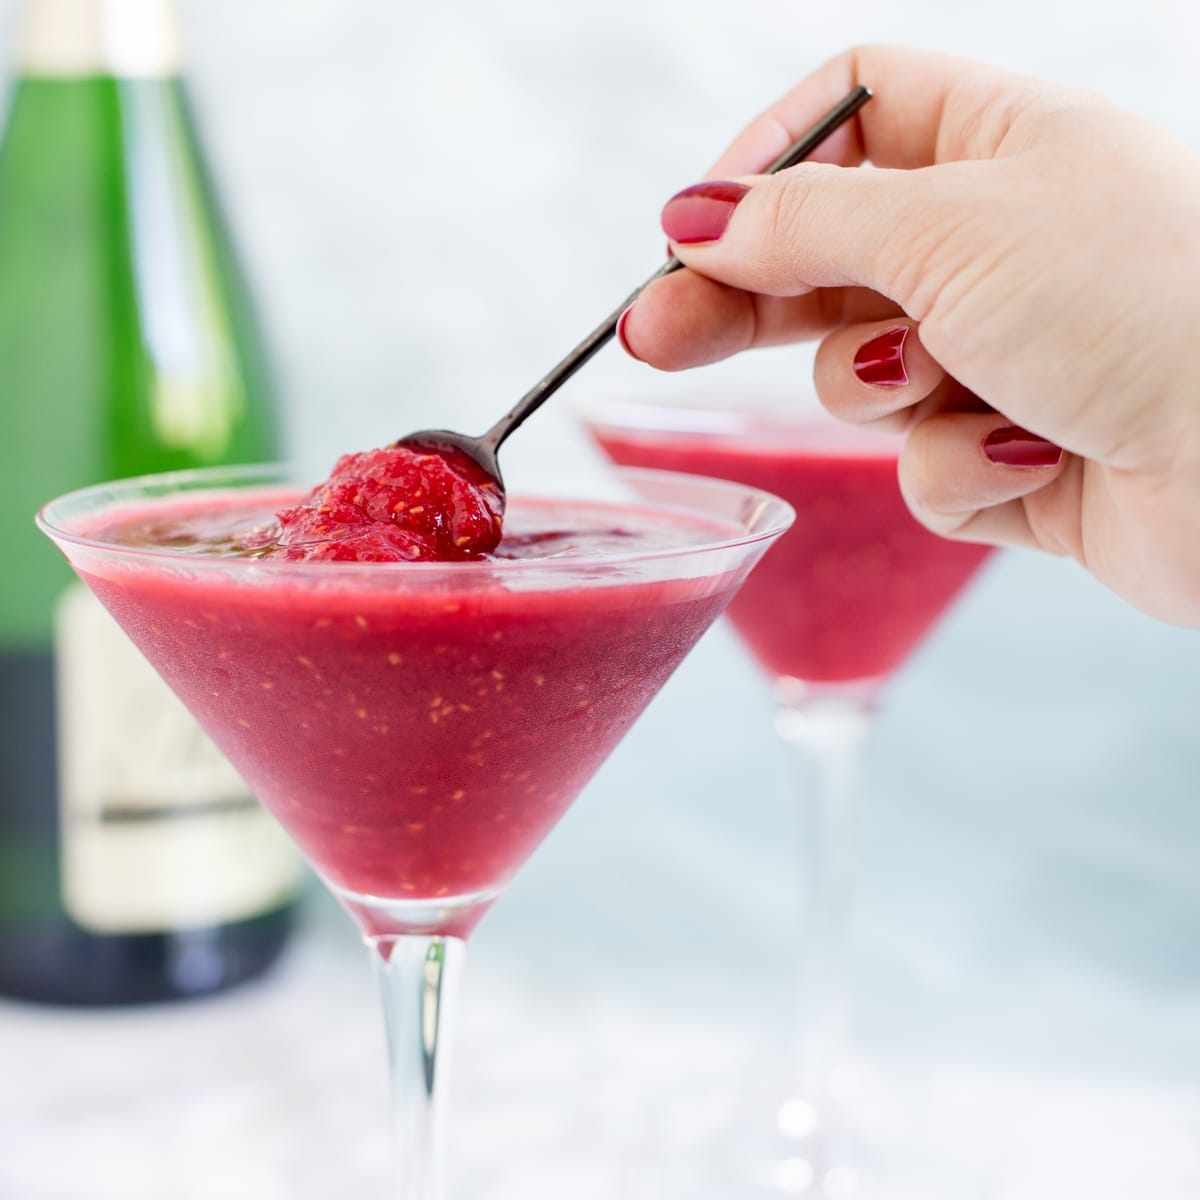 A refreshing combination of alcohol and frozen berries, raspberry Prosecco slushie is my favourite cocktail for the summer.